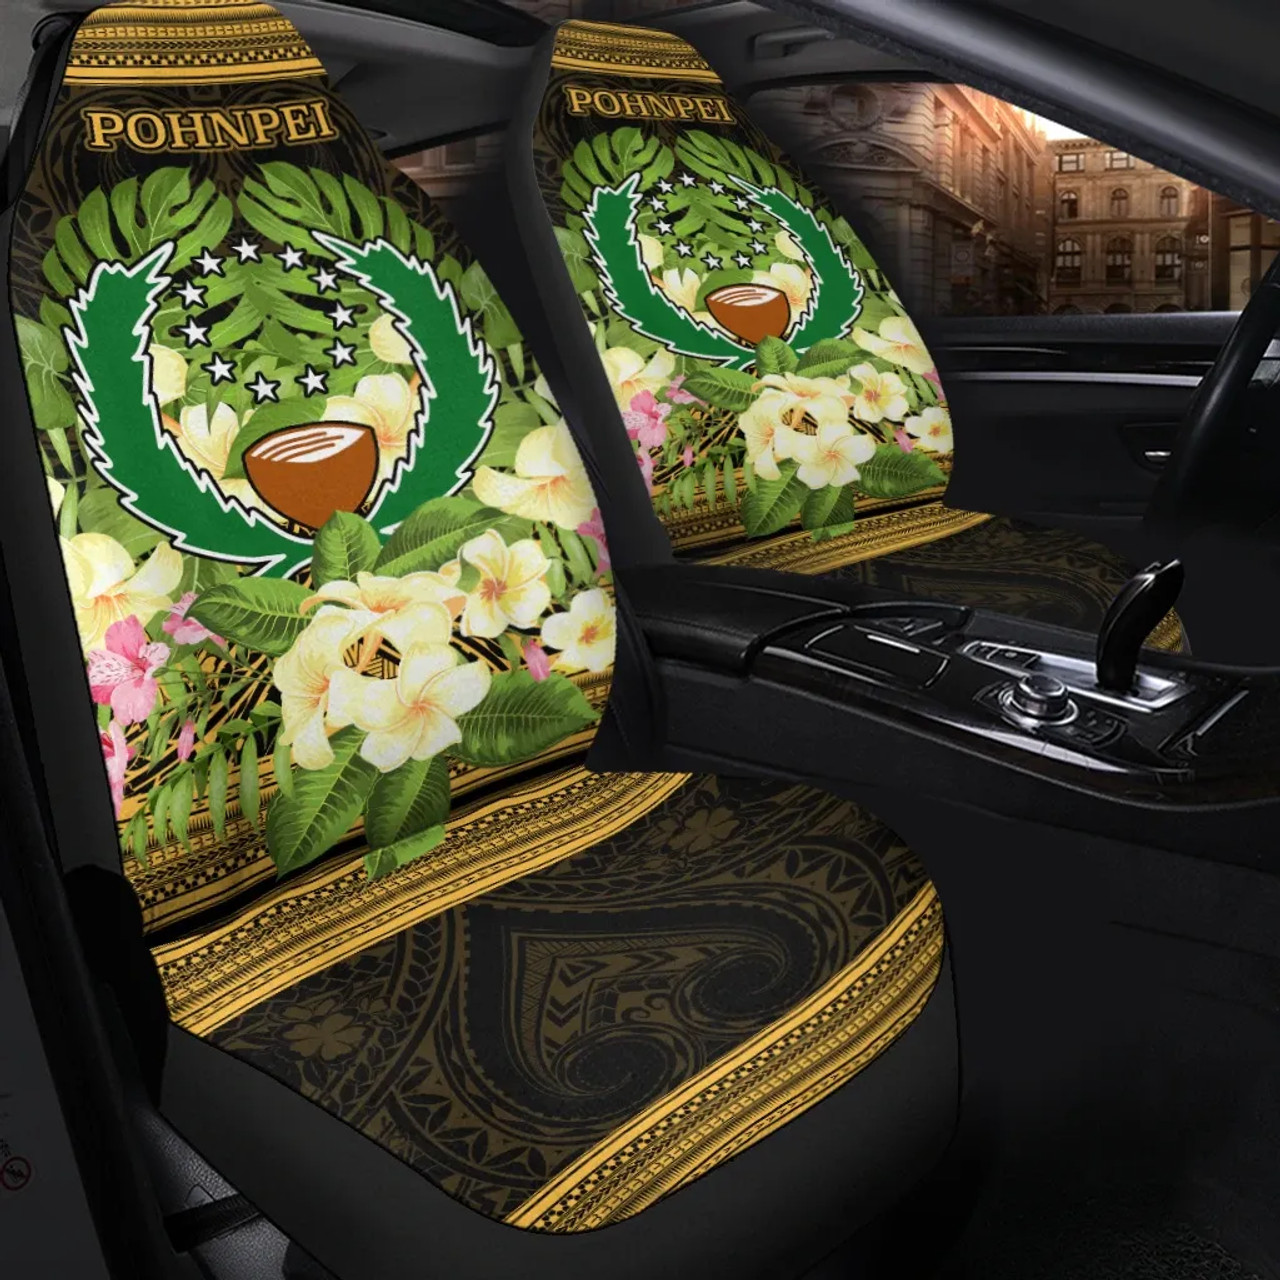 Pohnpei Car Seat Cover - Polynesian Gold Patterns Collection